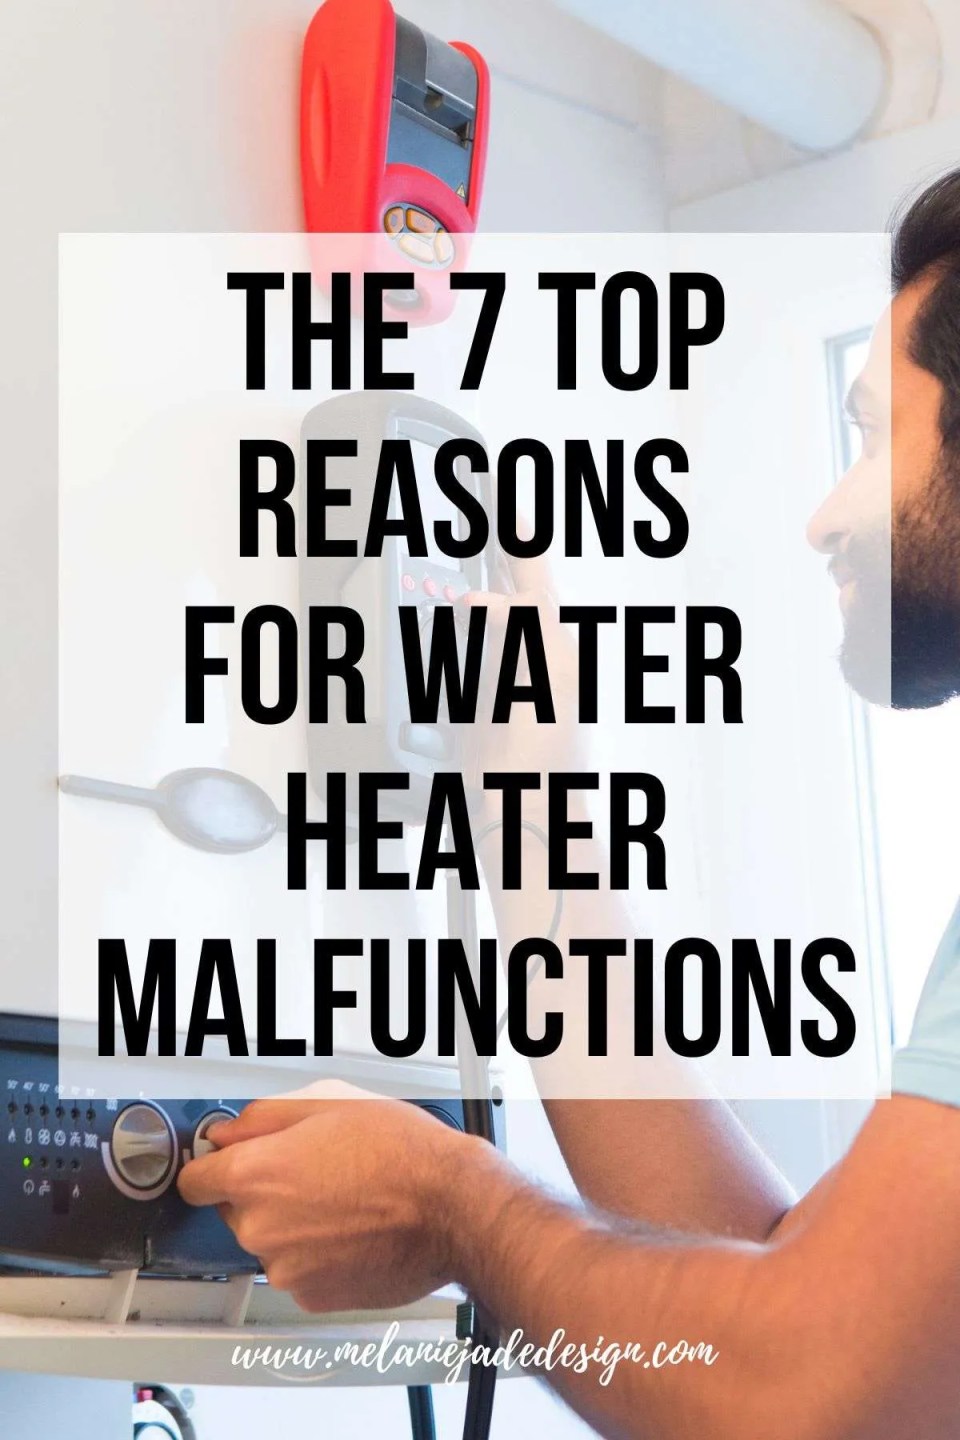 The 7 Top Reasons for Water Heater Malfunctions Pinterest pin